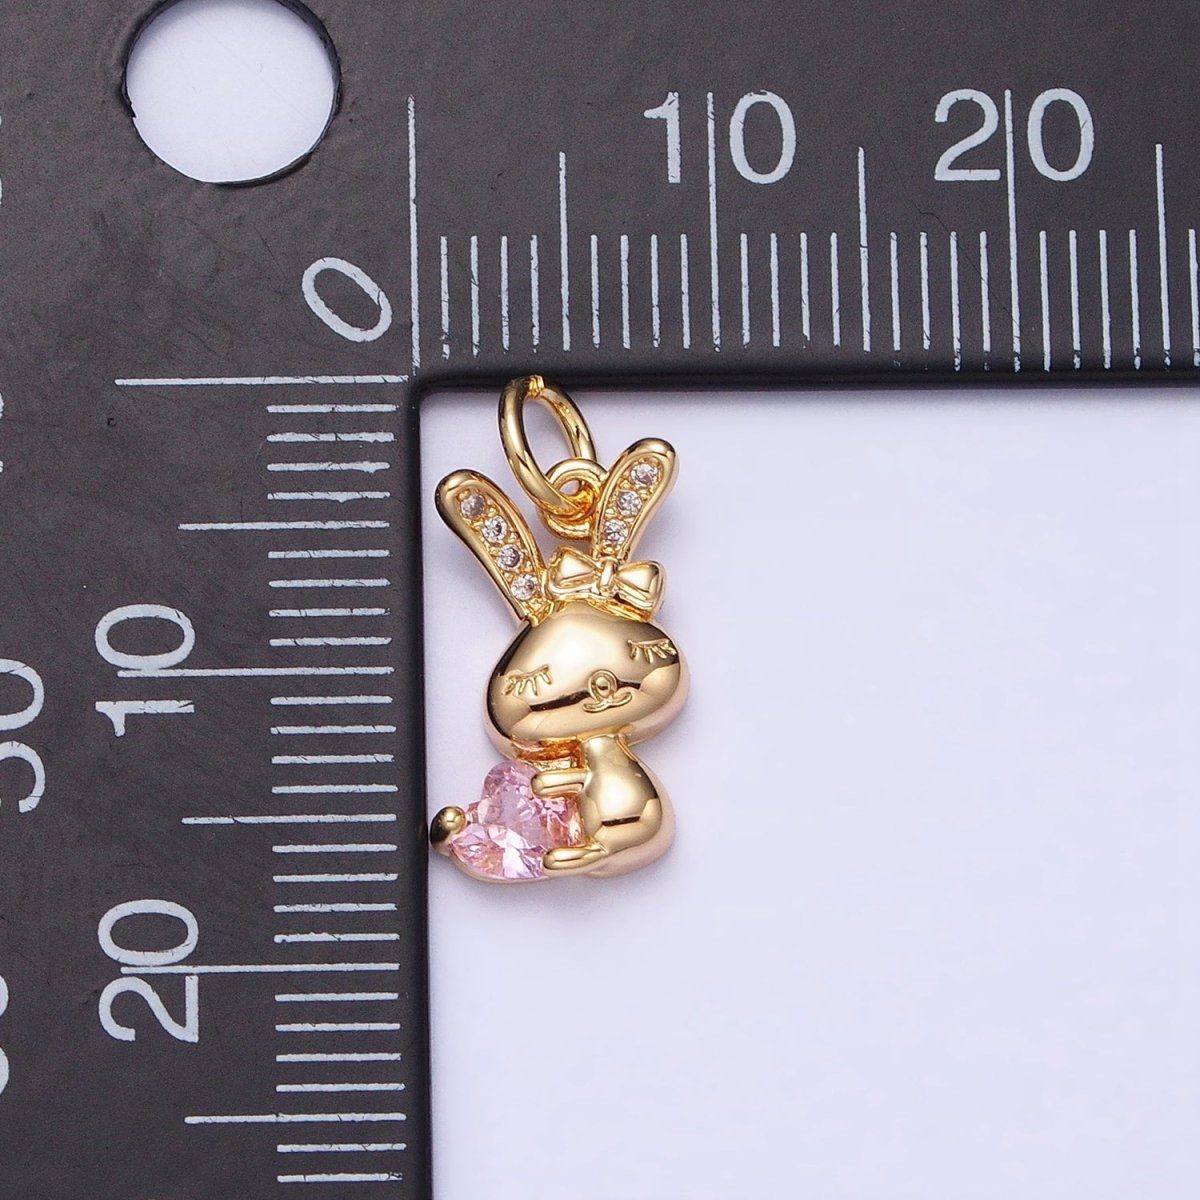 16K Gold Filled Bunny Rabbit Hugging Clear, Pink Heart CZ Add-On Charm | AC1185 - AC1188 - DLUXCA